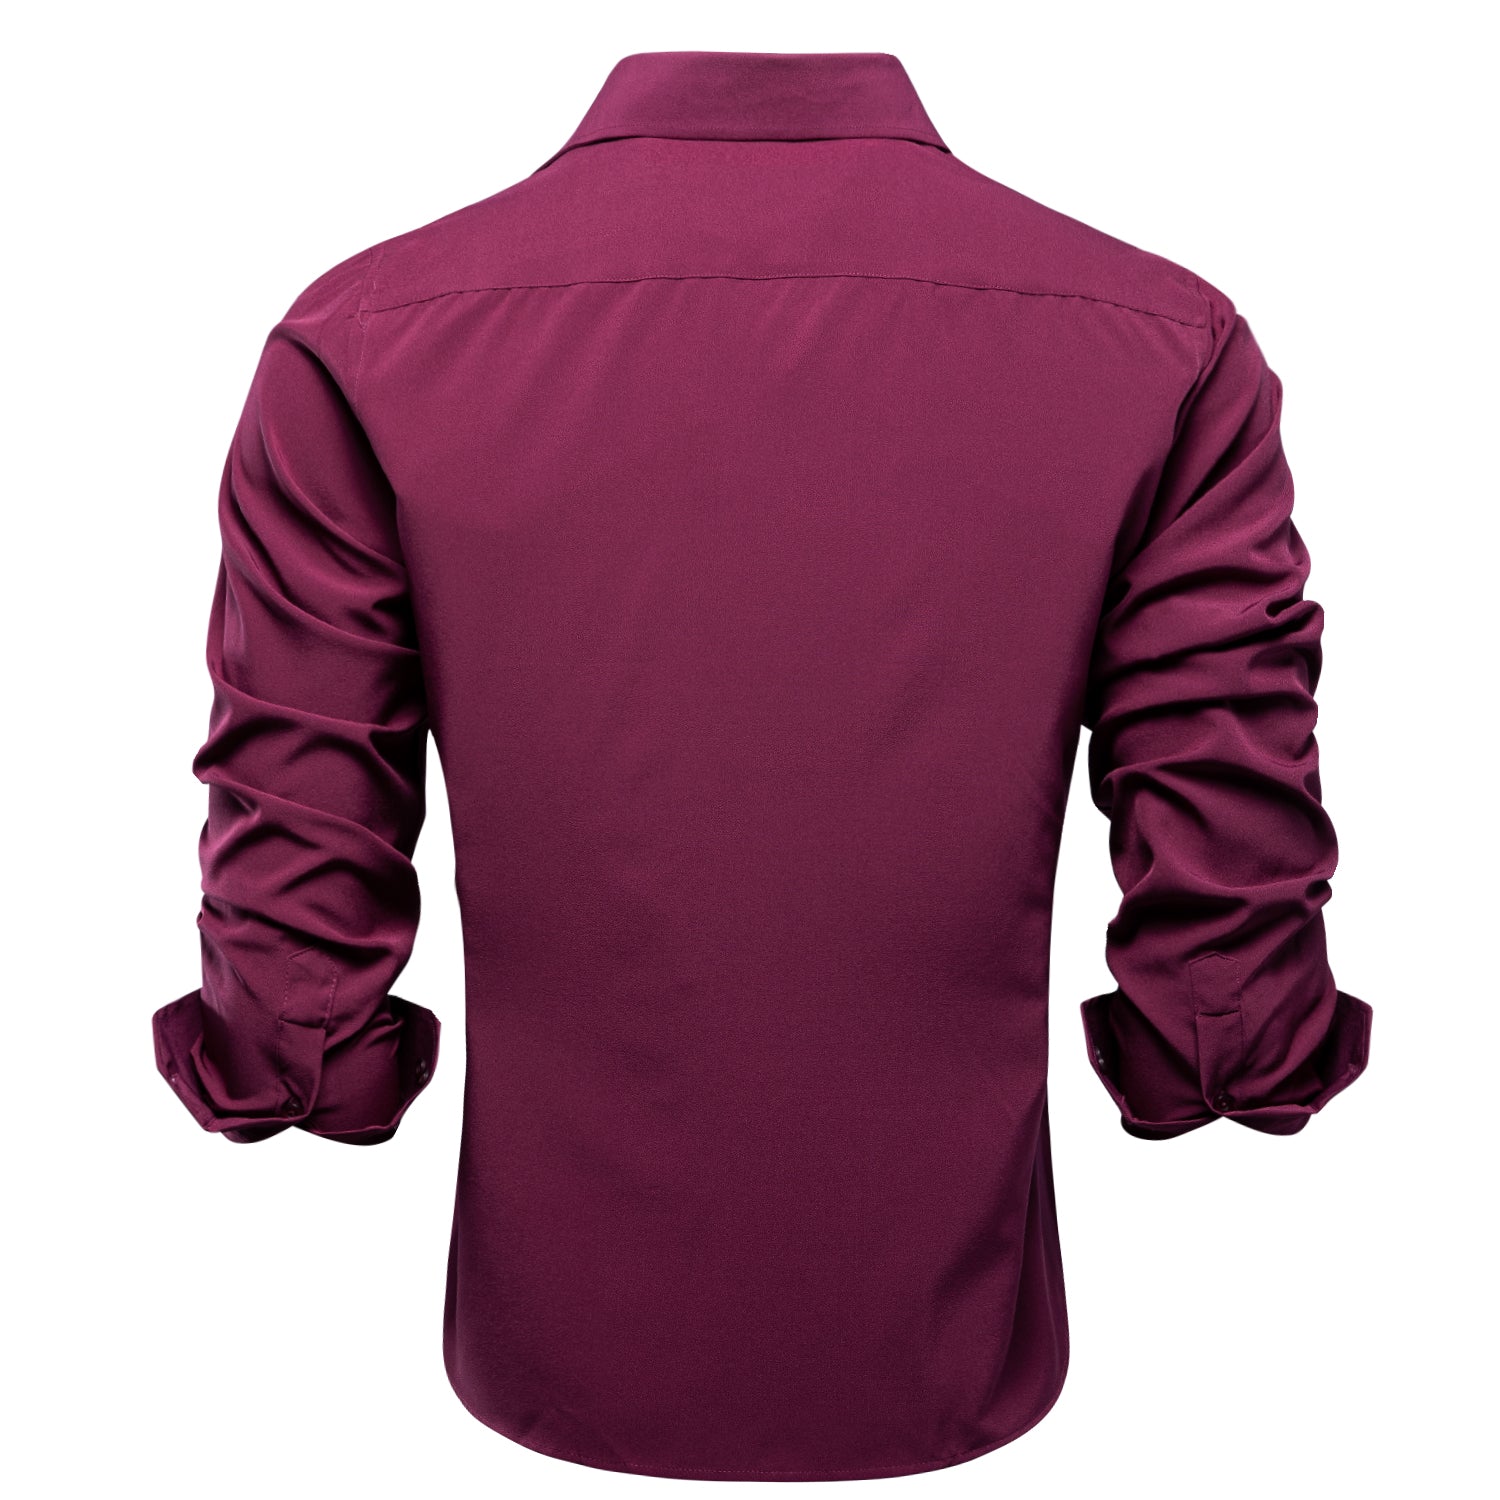 Clearance Sale Plum Red Stretch Men's Long Sleeve Shirt